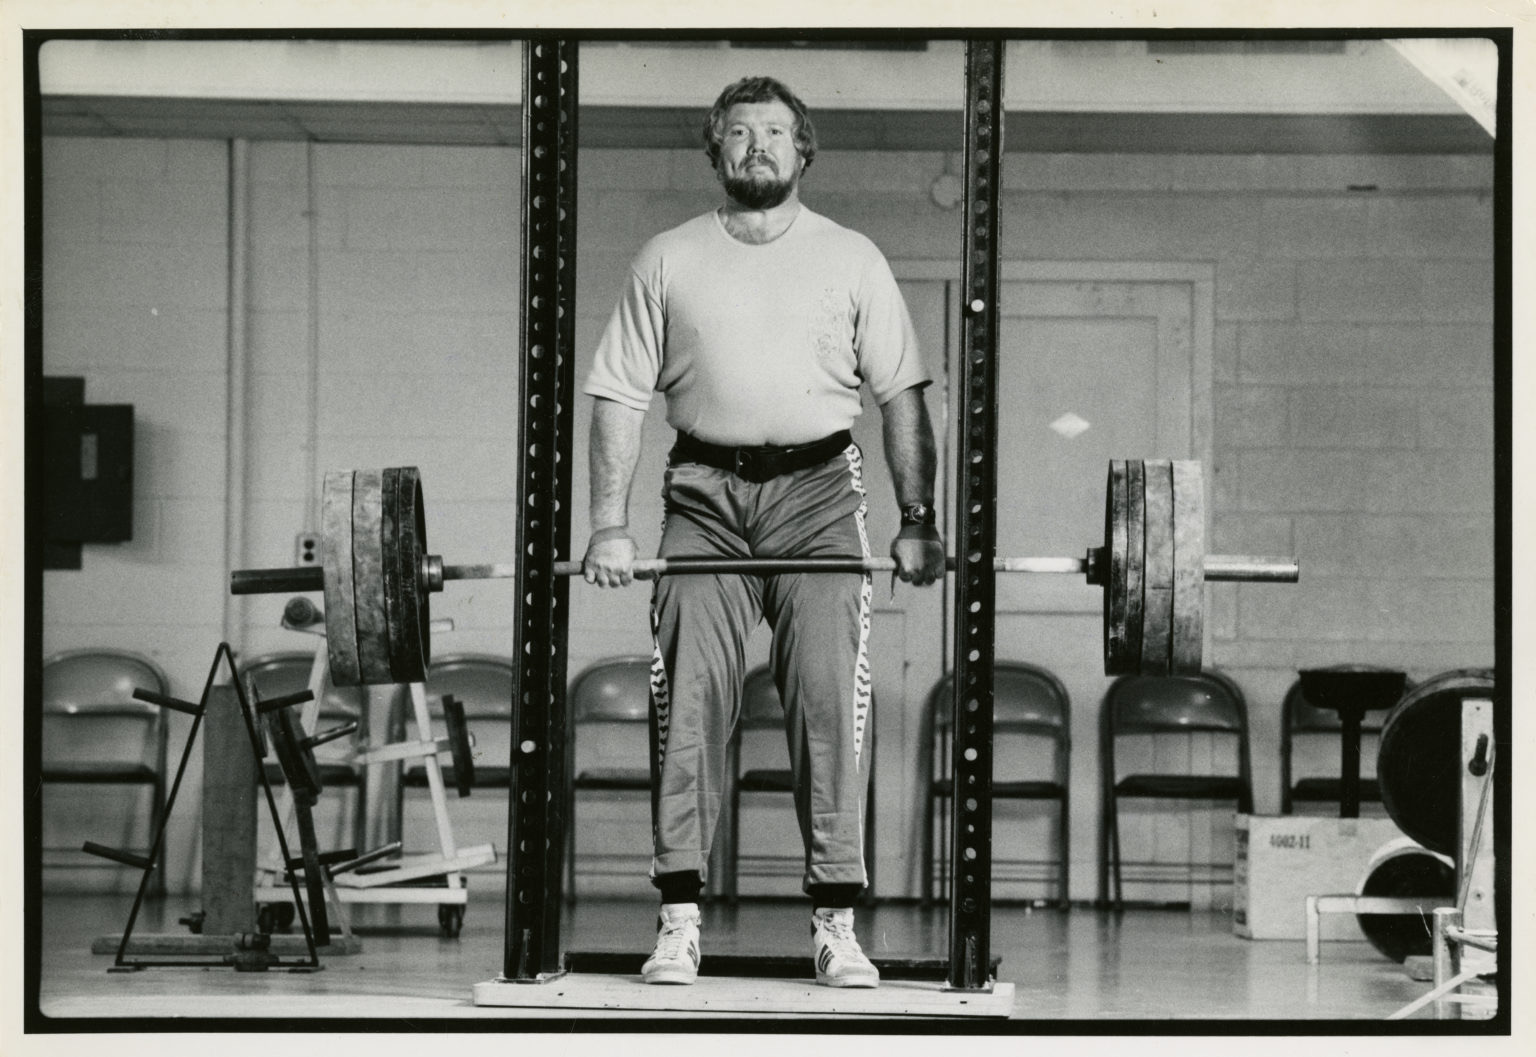 Black and white photo of weightlifter Terry Todd standing and holding a barbell with weights.